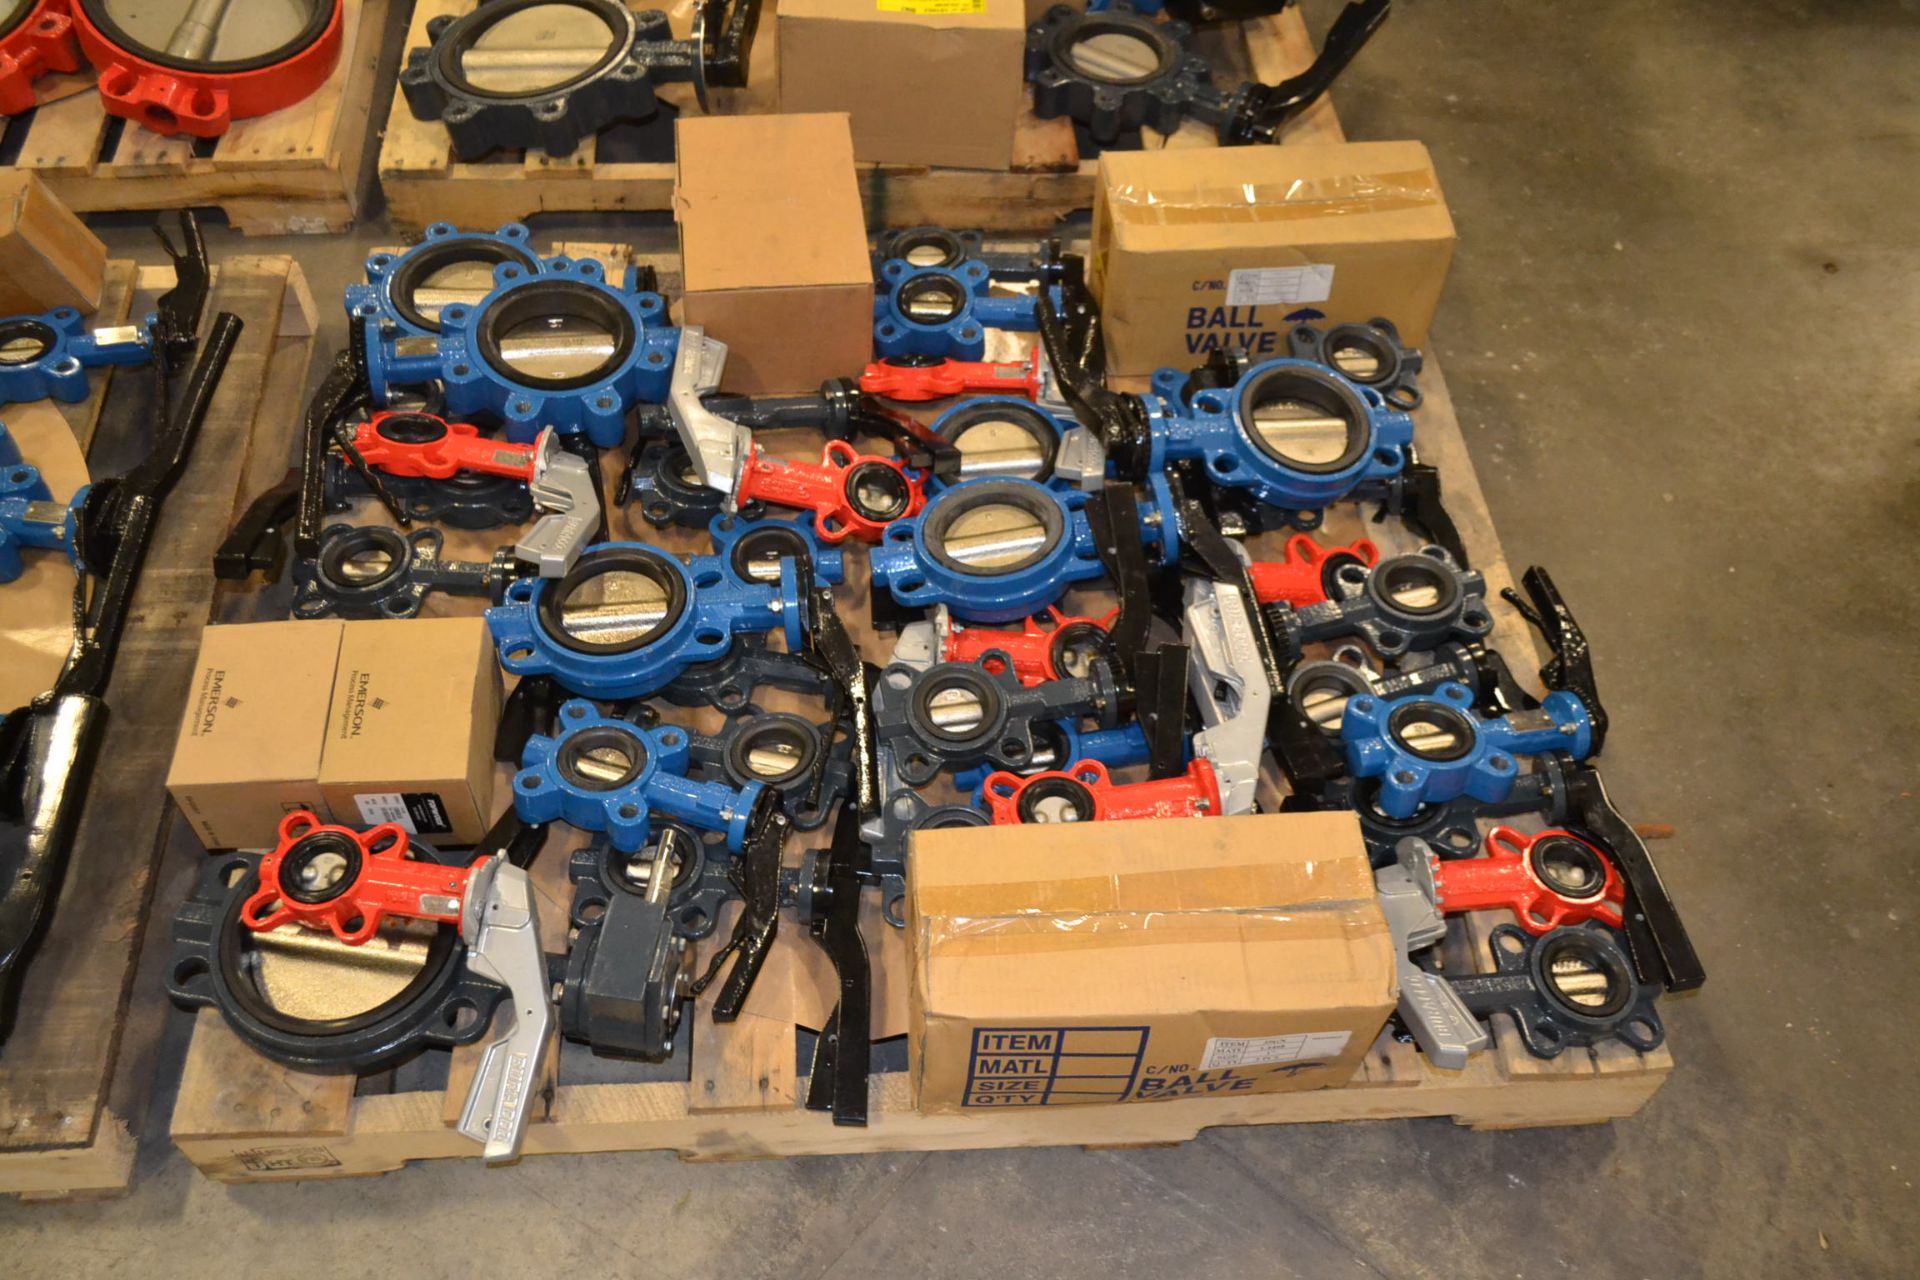 LOT OF ASSORTED BUTTERFLY VALVES, AND ACTUATORS - Image 7 of 7